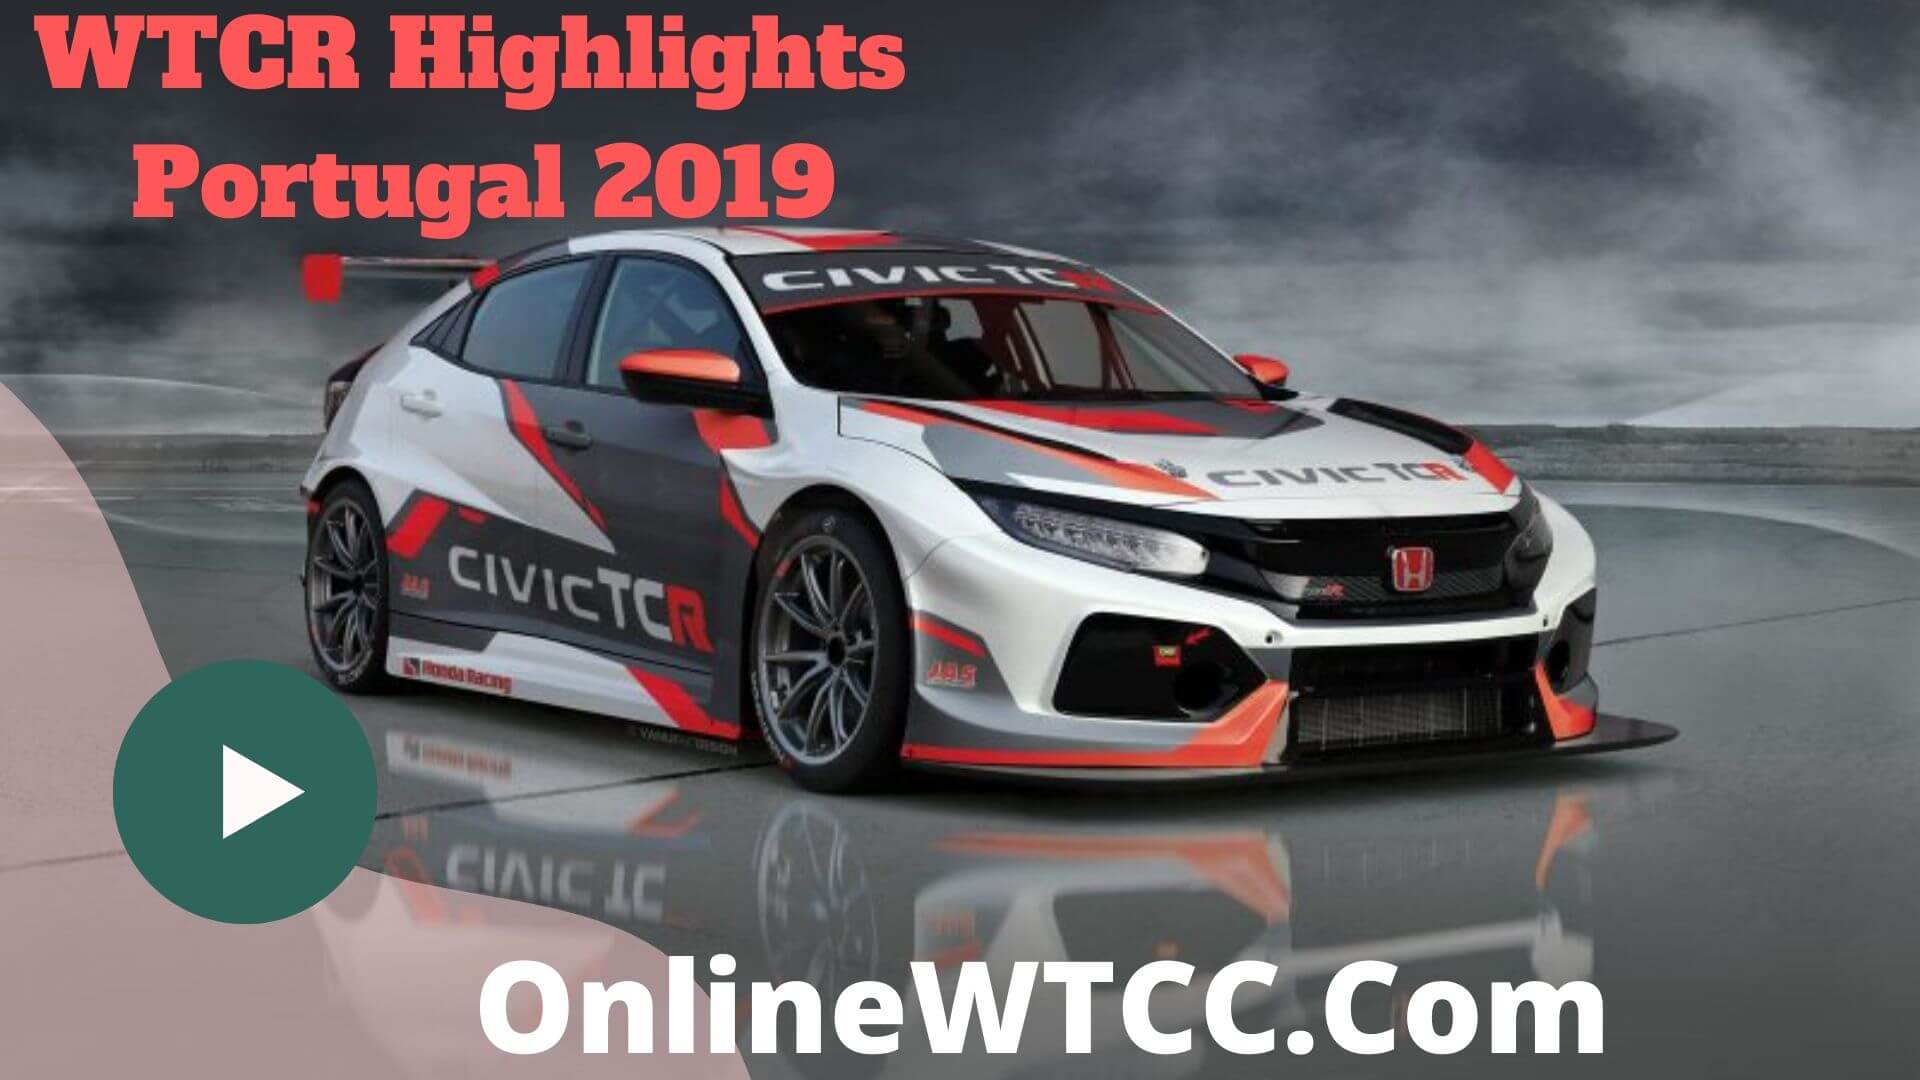 Portugal WTCR Highlights 2019